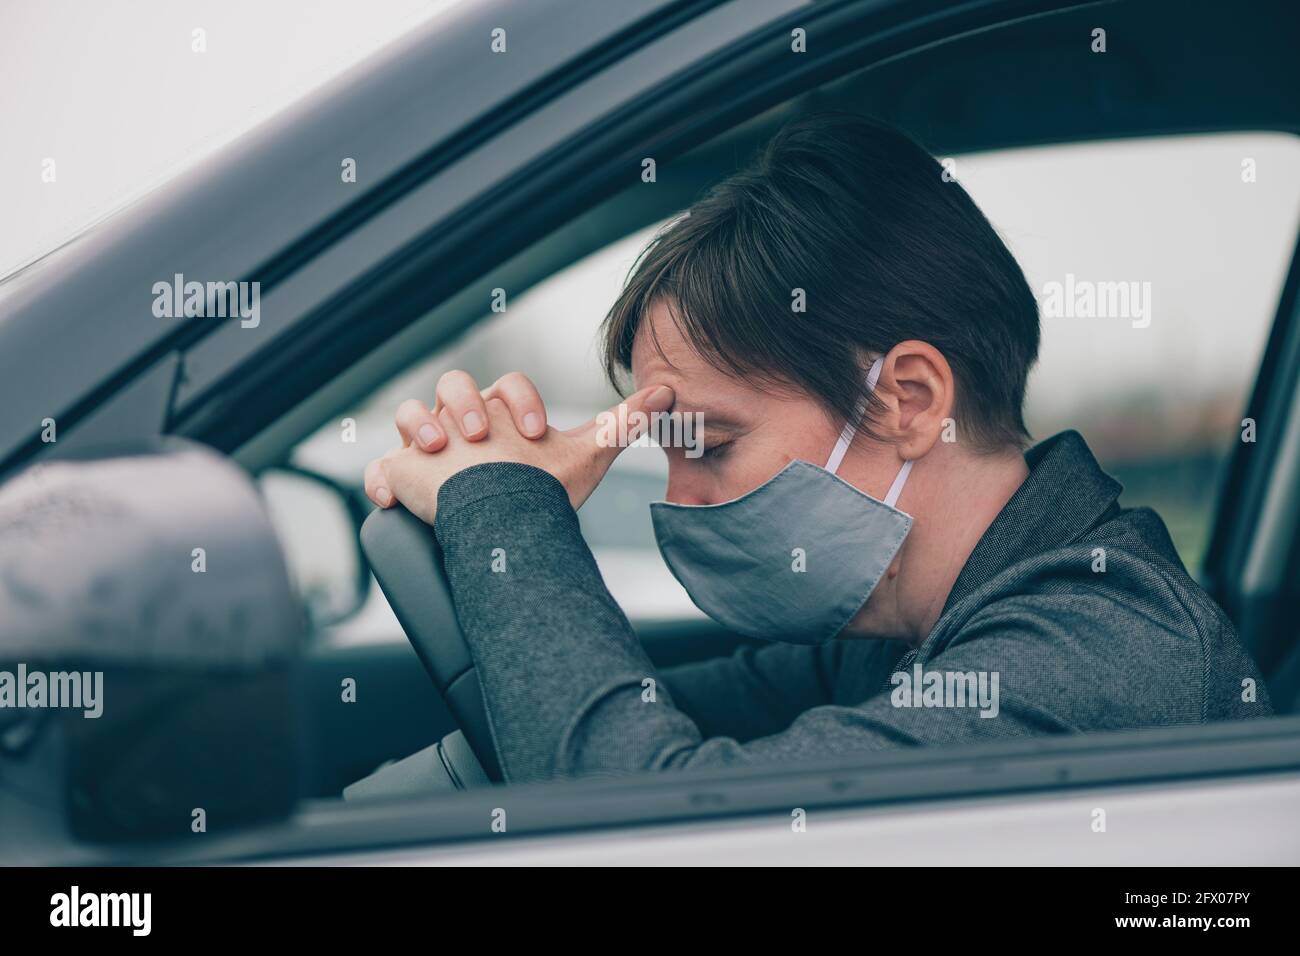 Disappointed female driver with protective face mask sitting in the car during Covid-19 pandemics, leaning her head on to steering wheel, selective fo Stock Photo